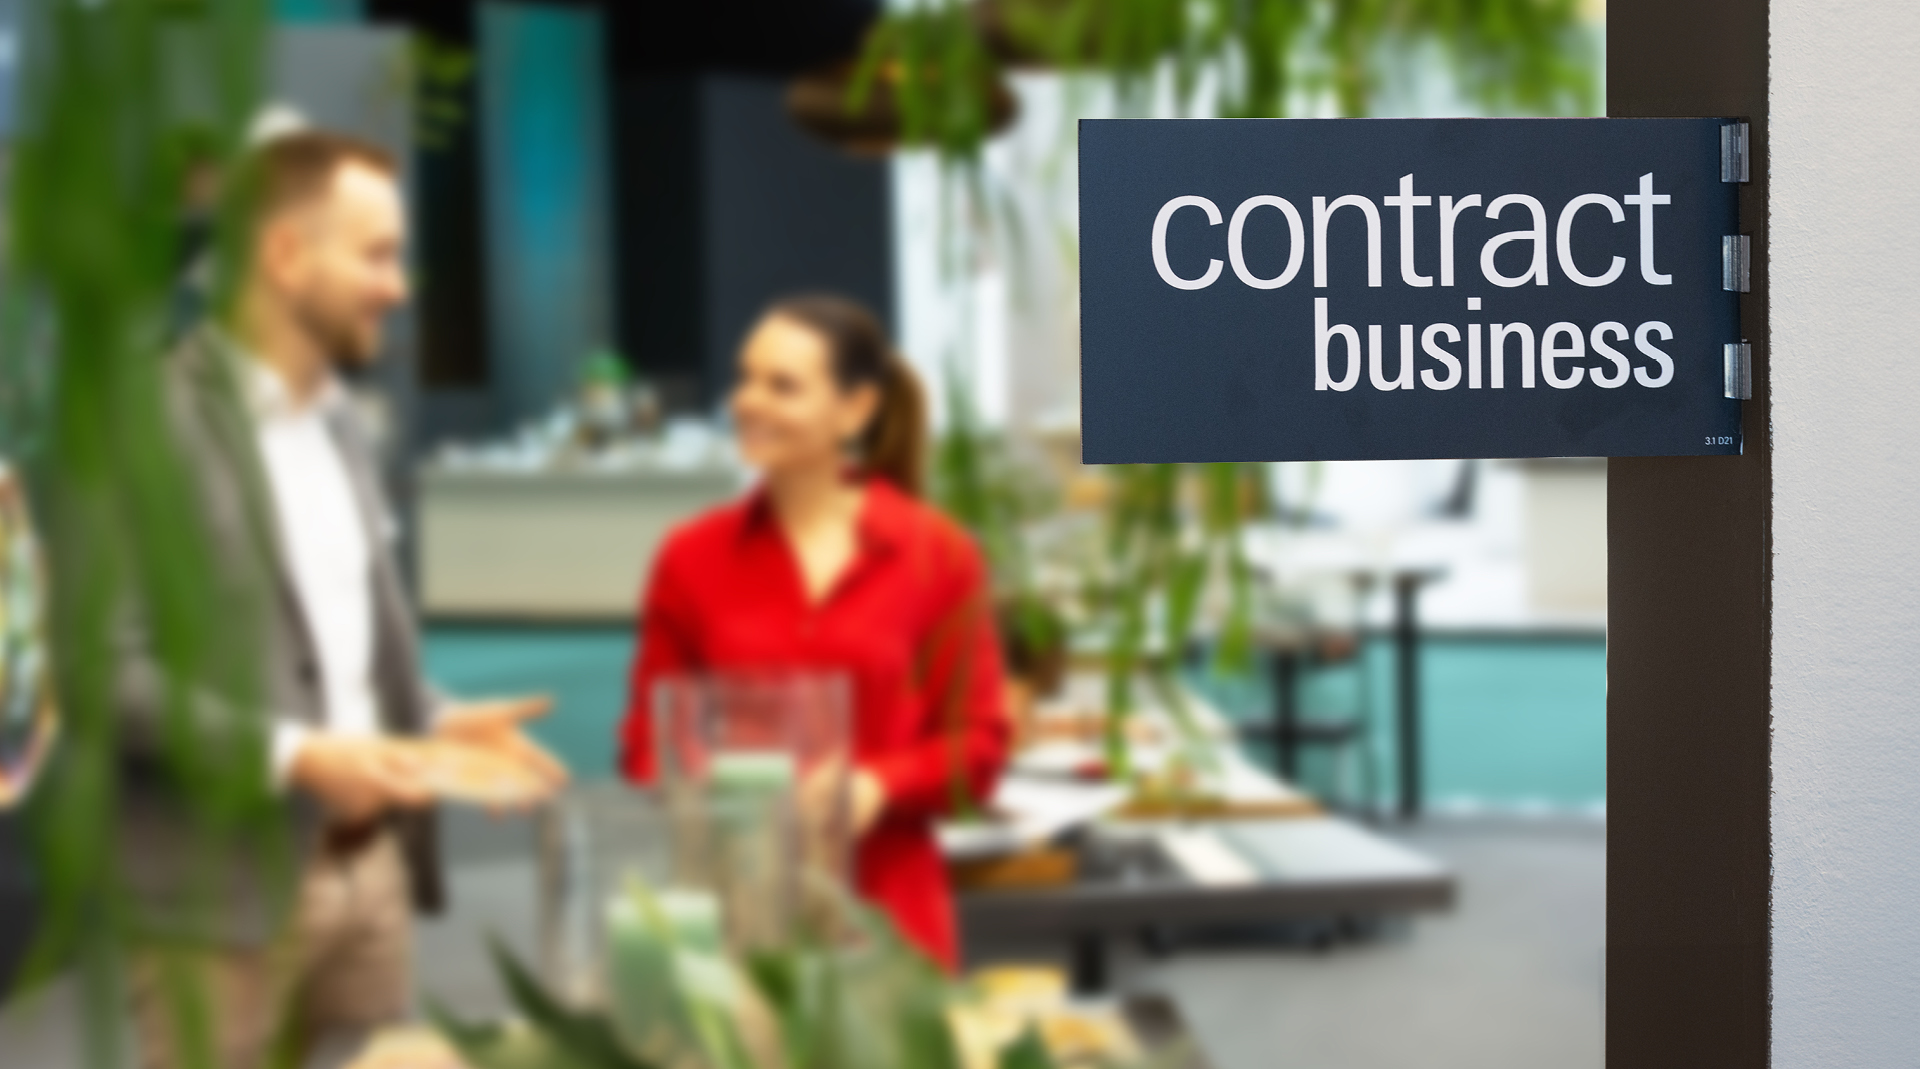 Contract Business exhibitor